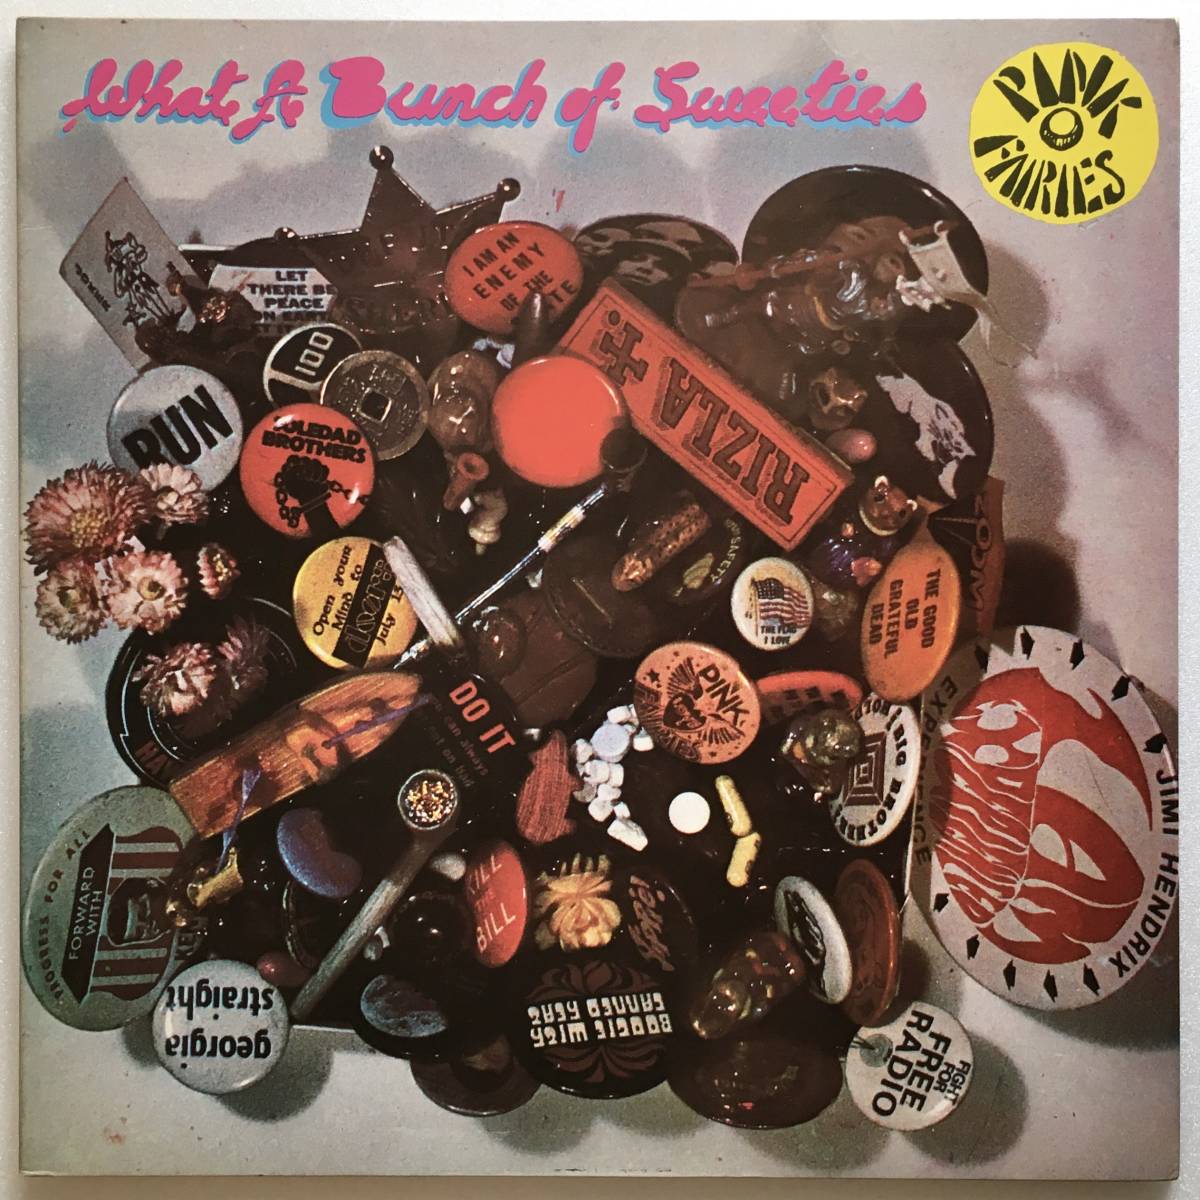 PINK FAIRIES「WHAT A BUNCH OF SWEETIES」UK ORIGINAL POLYDOR 2383 132 '72 GATEHOLD SLEEVE_画像1